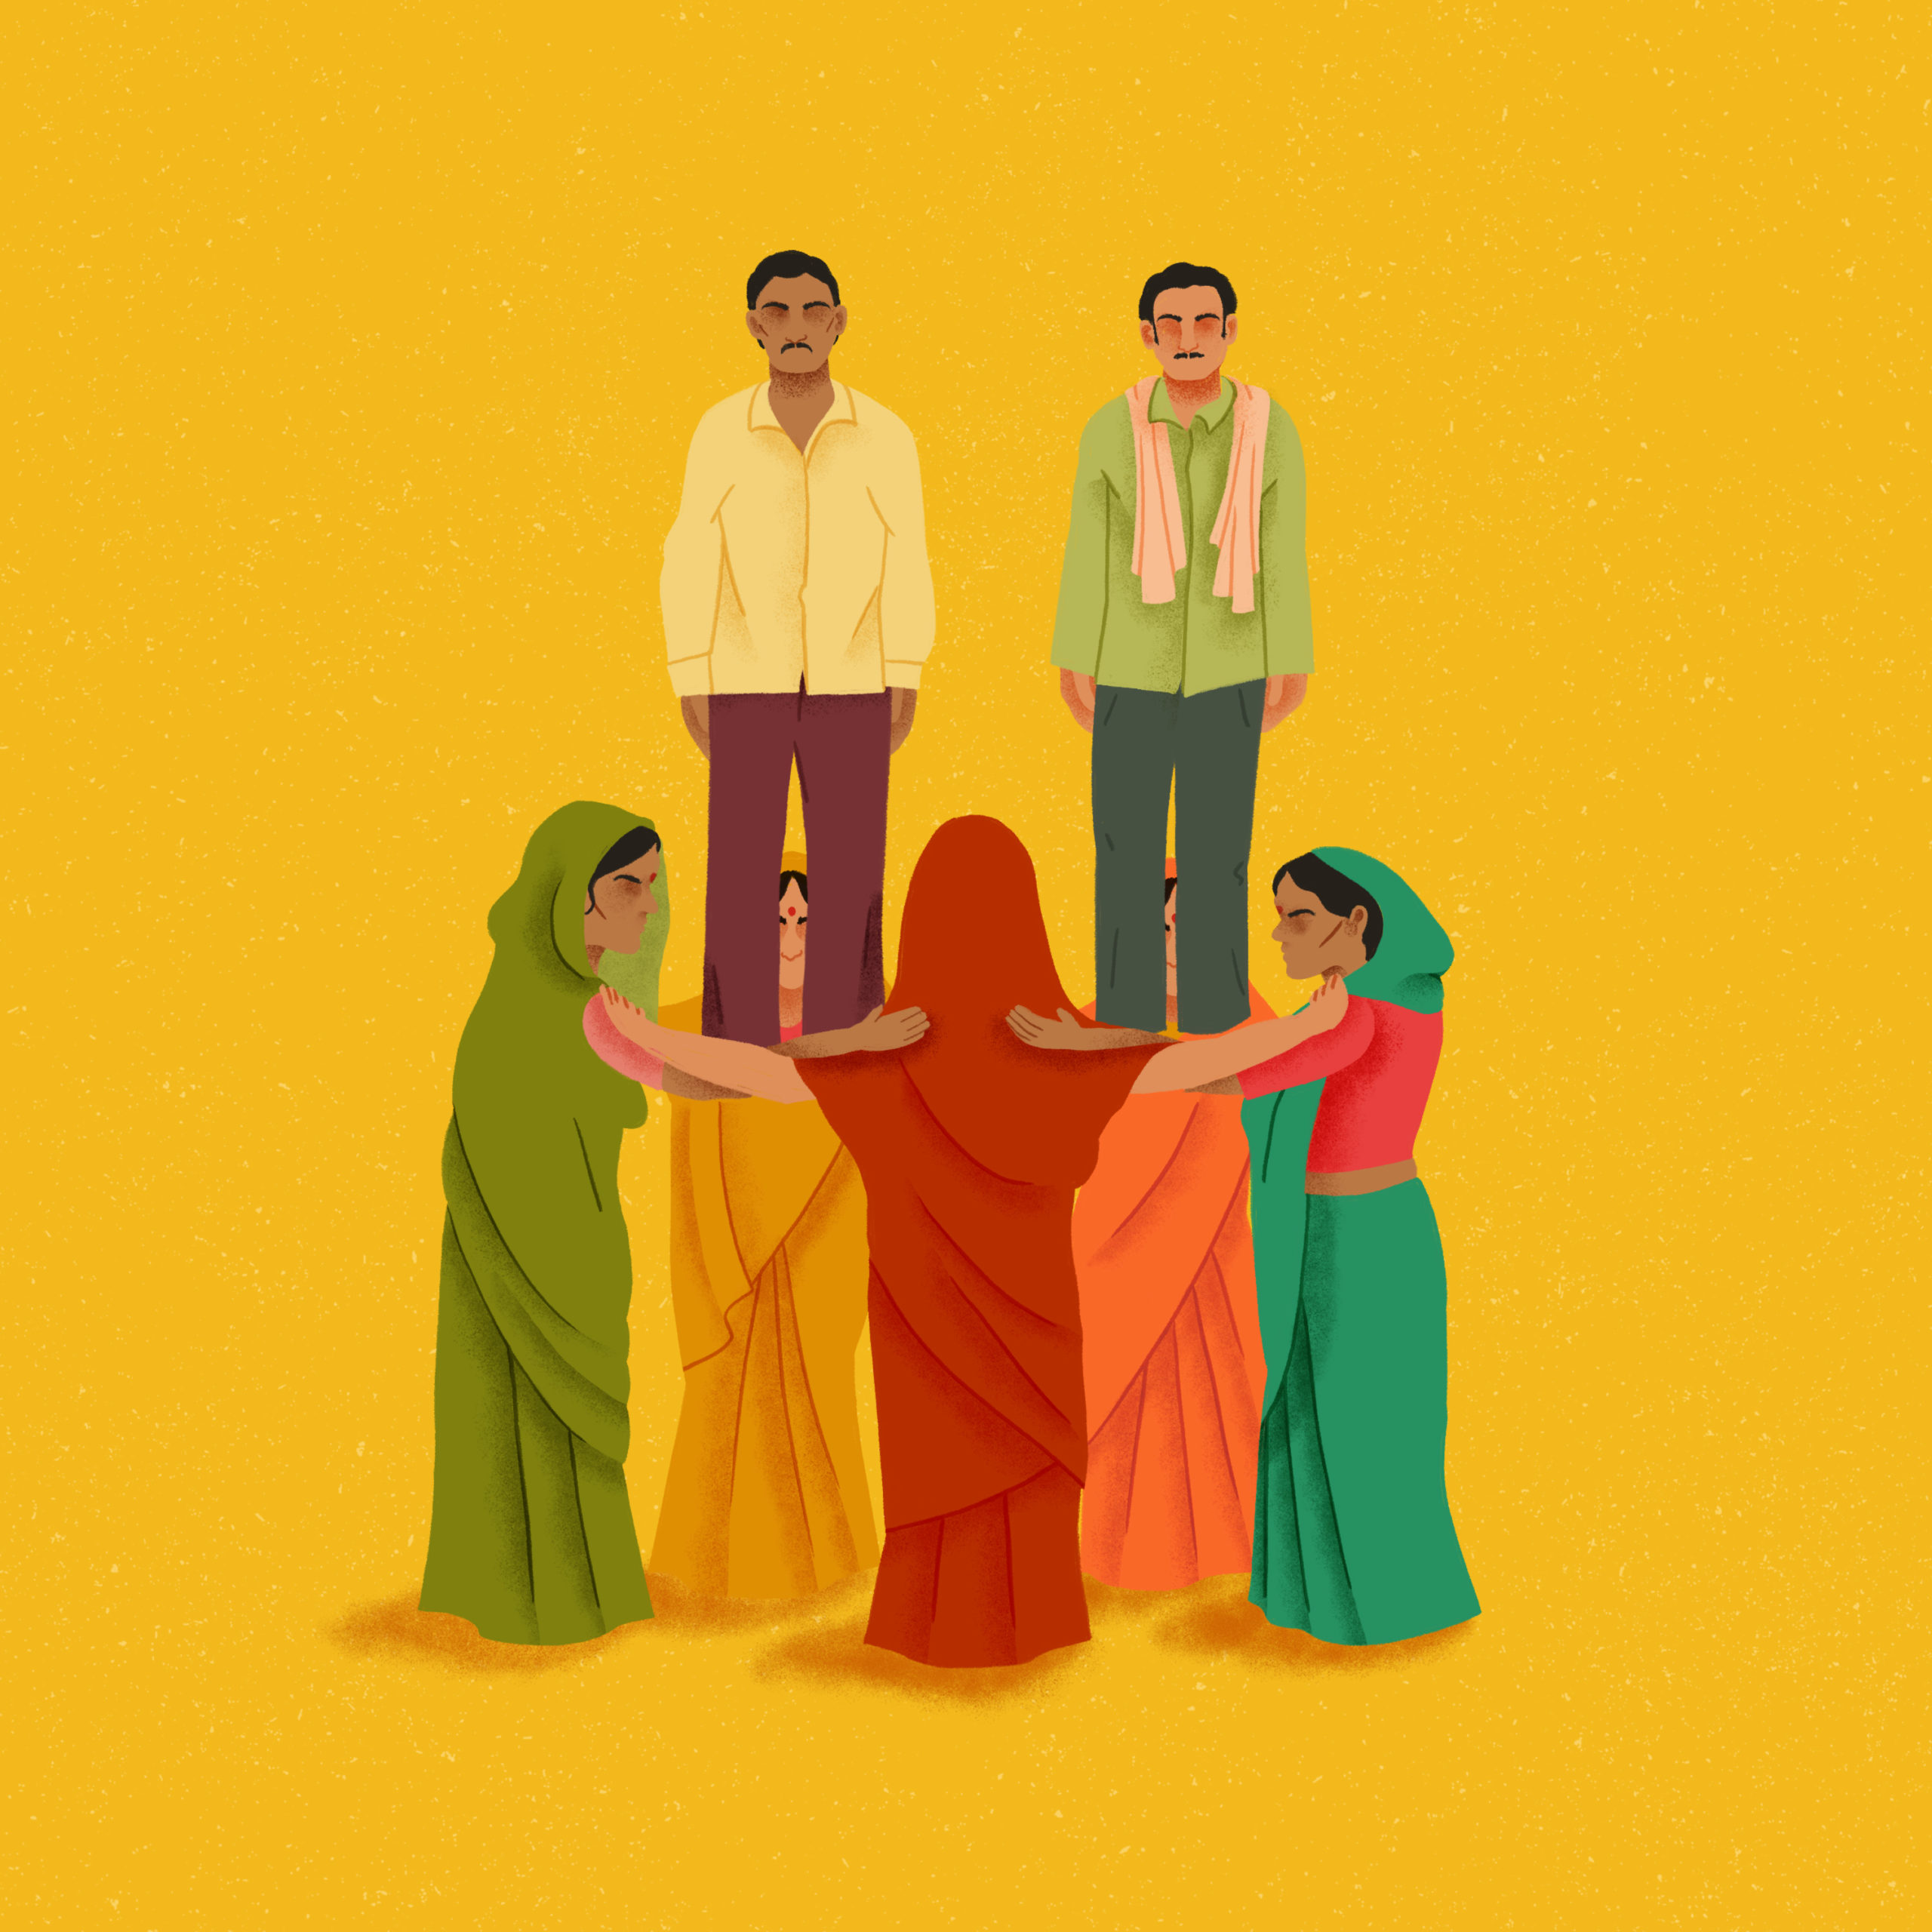 An illustration of women standing in a circle with men standing on their shoulders